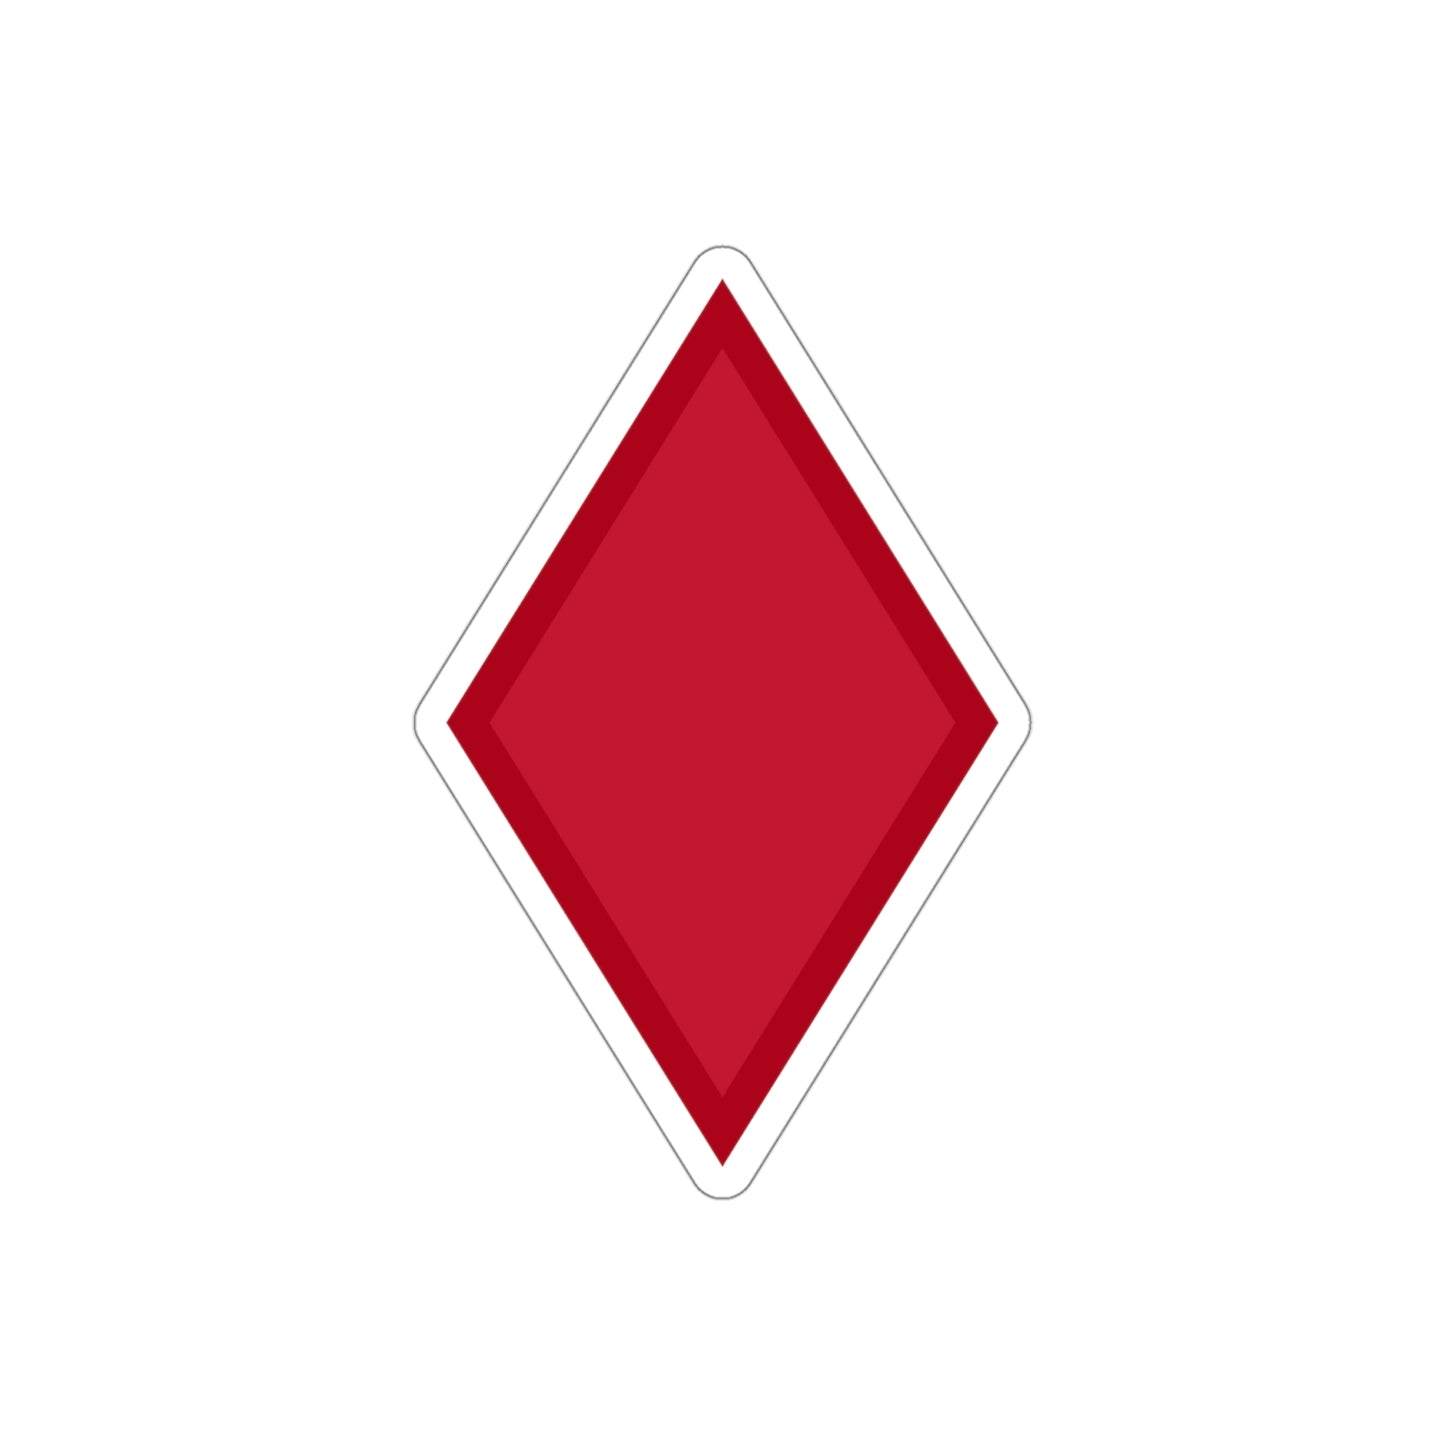 5th Infantry Division